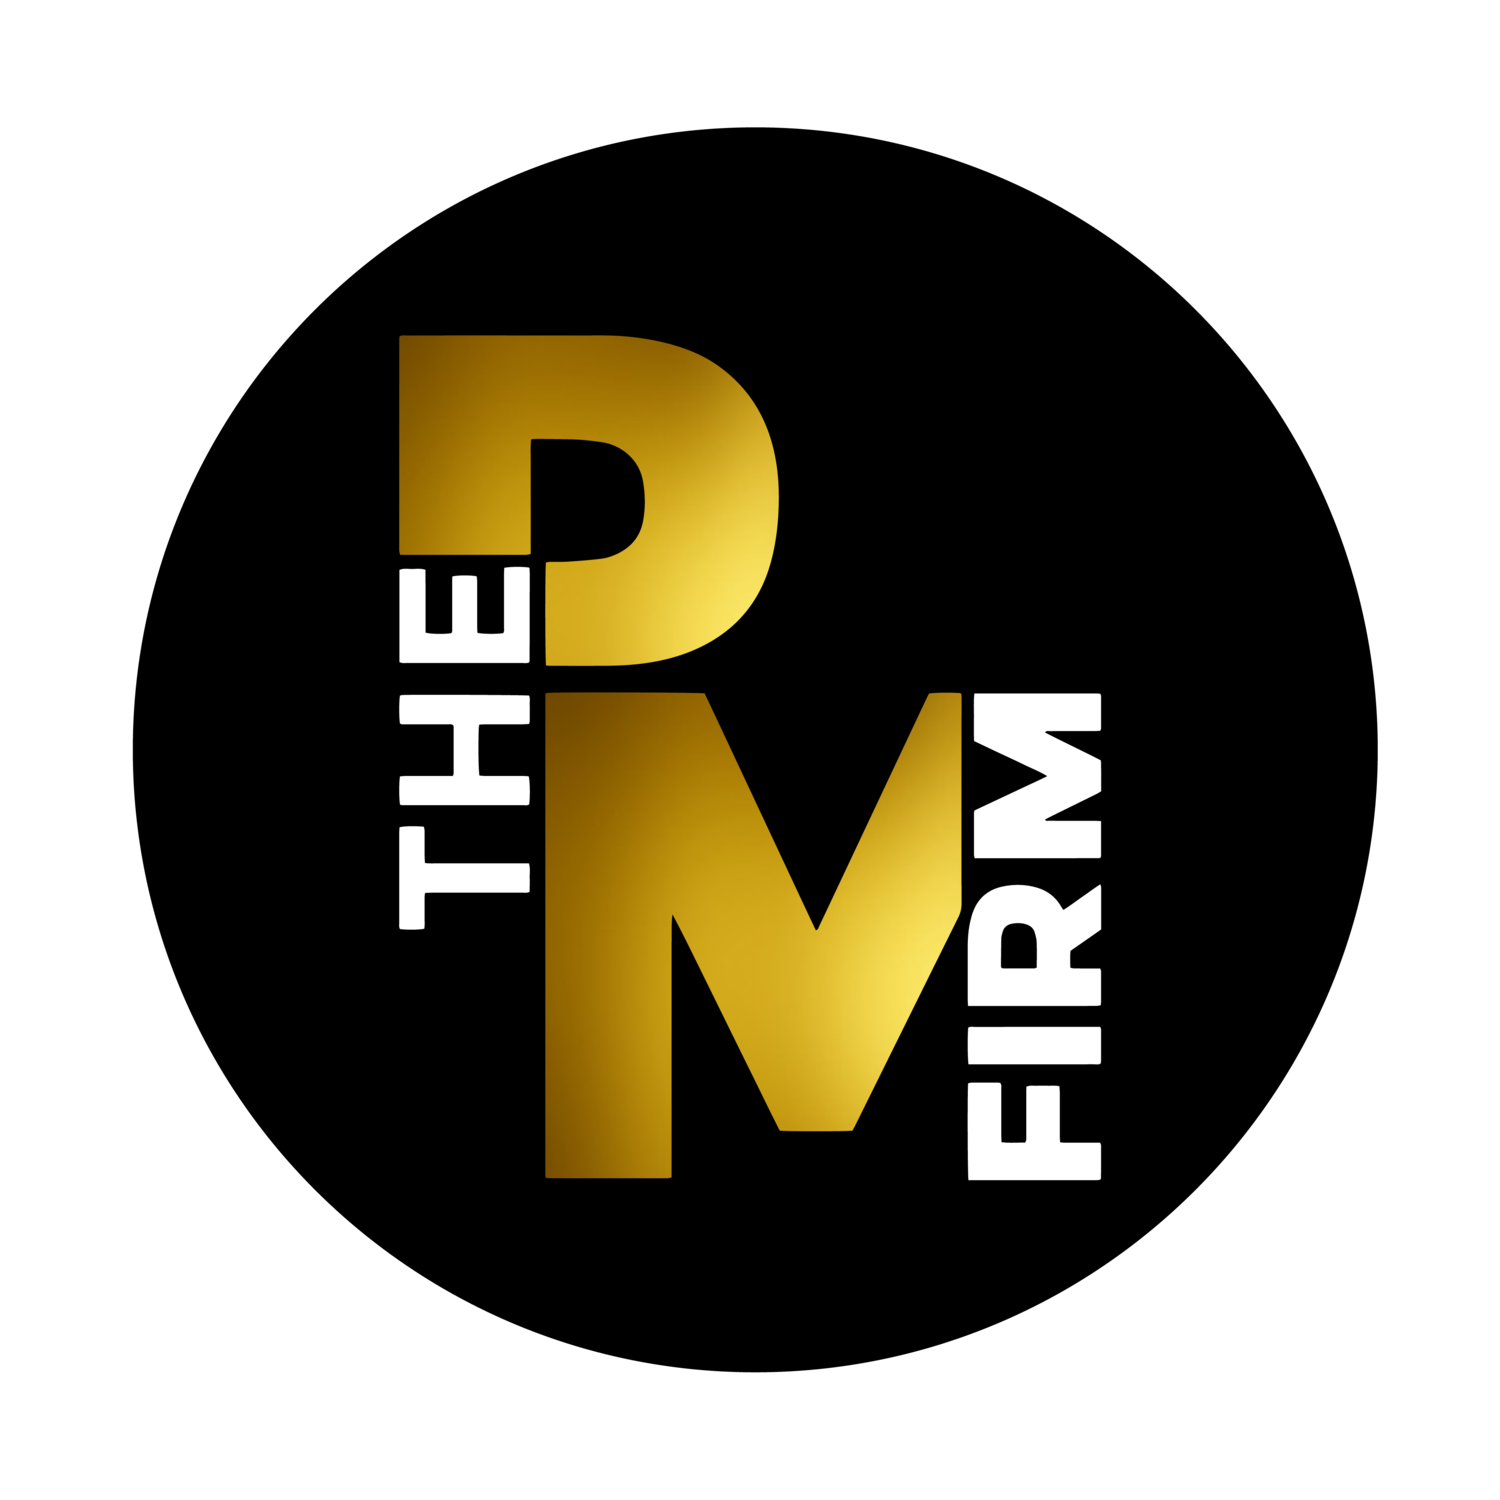 The P.M. Firm